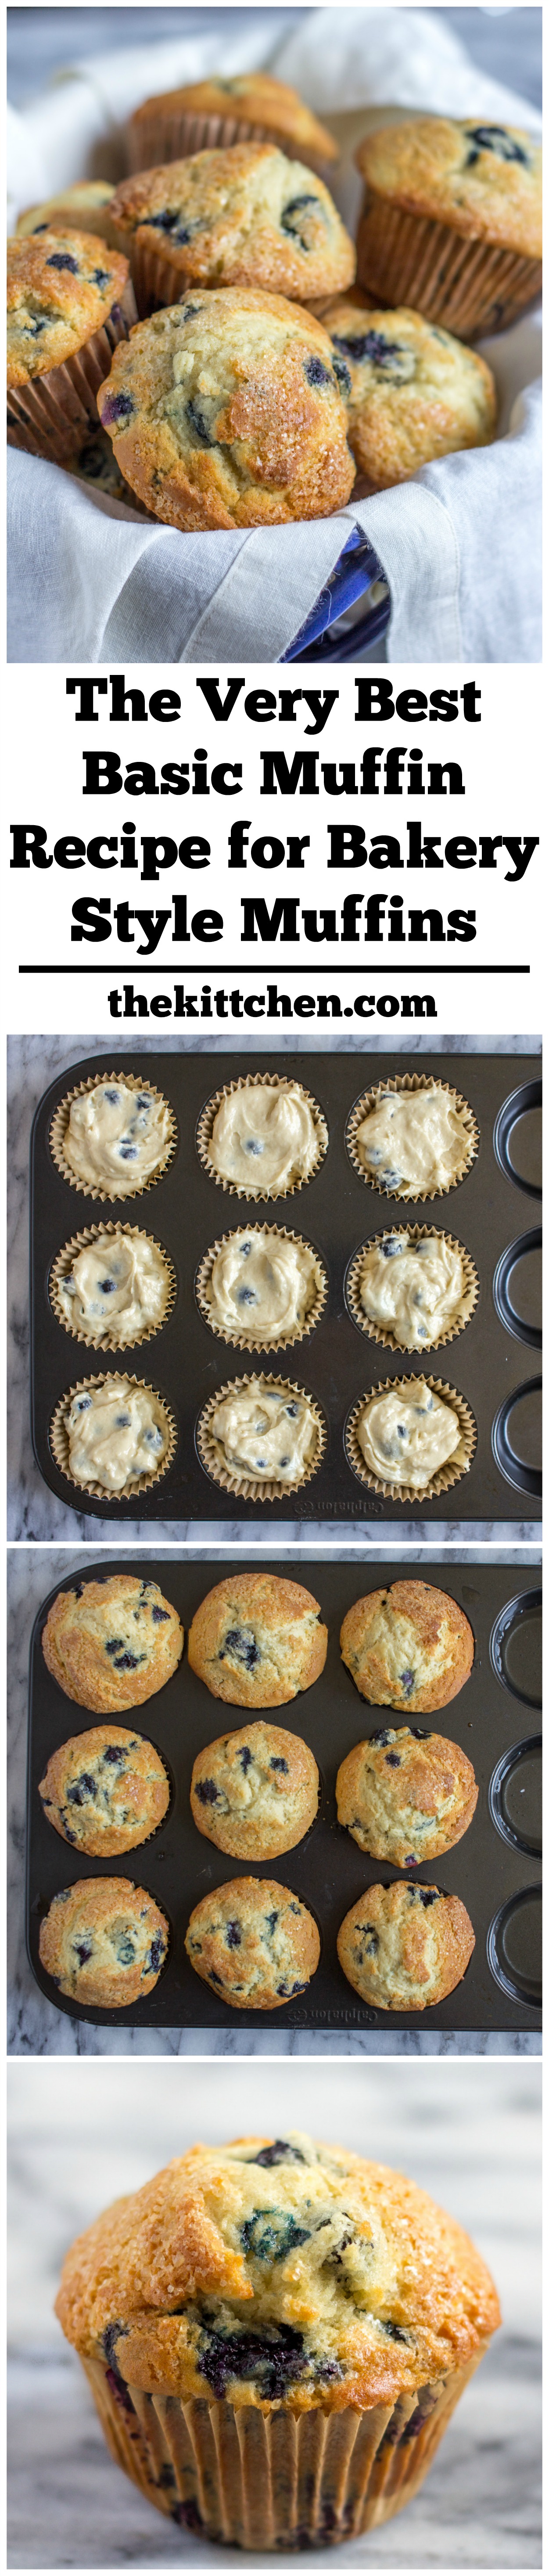 The perfect blueberry muffin recipe - make muffins with bakery style muffin tops at home!